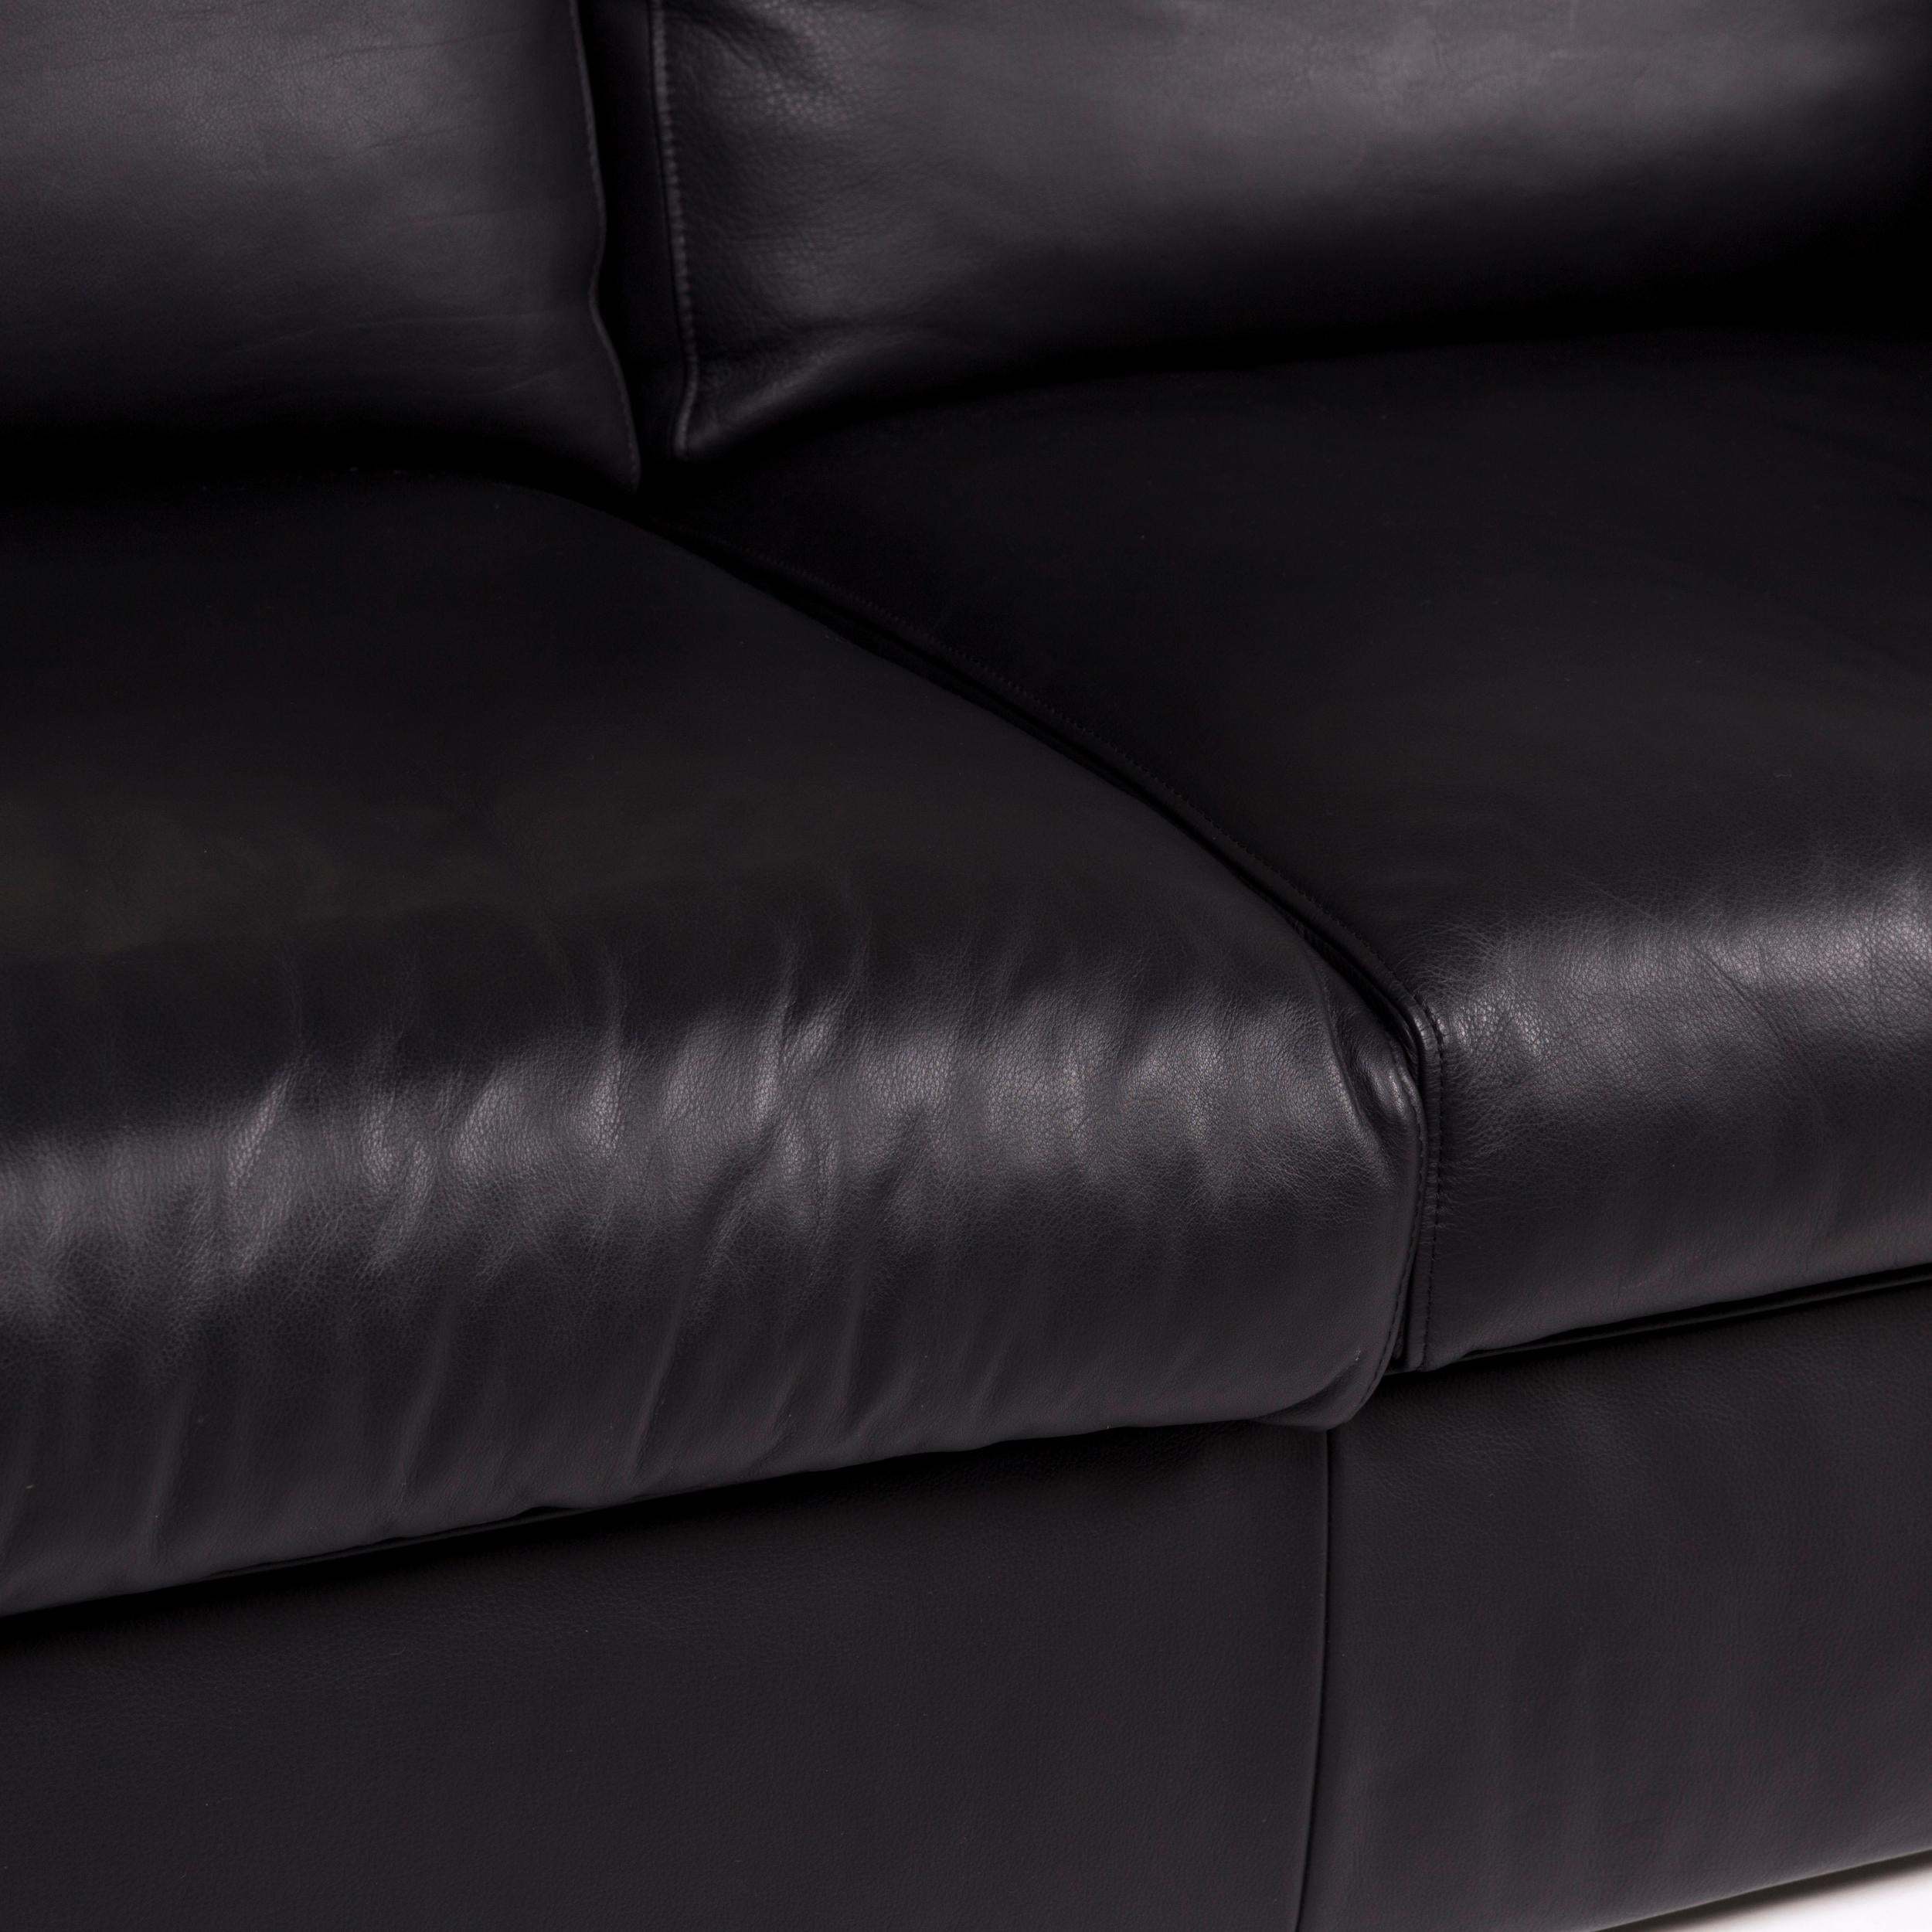 We bring to you a WK living leather sofa black two-seat couch.
   
 

 Product measurements in centimeters:
 

Depth 92
Width 179
Height 80
Seat-height 41
Rest-height 65
Seat-depth 52
Seat-width 119
Back-height 38.